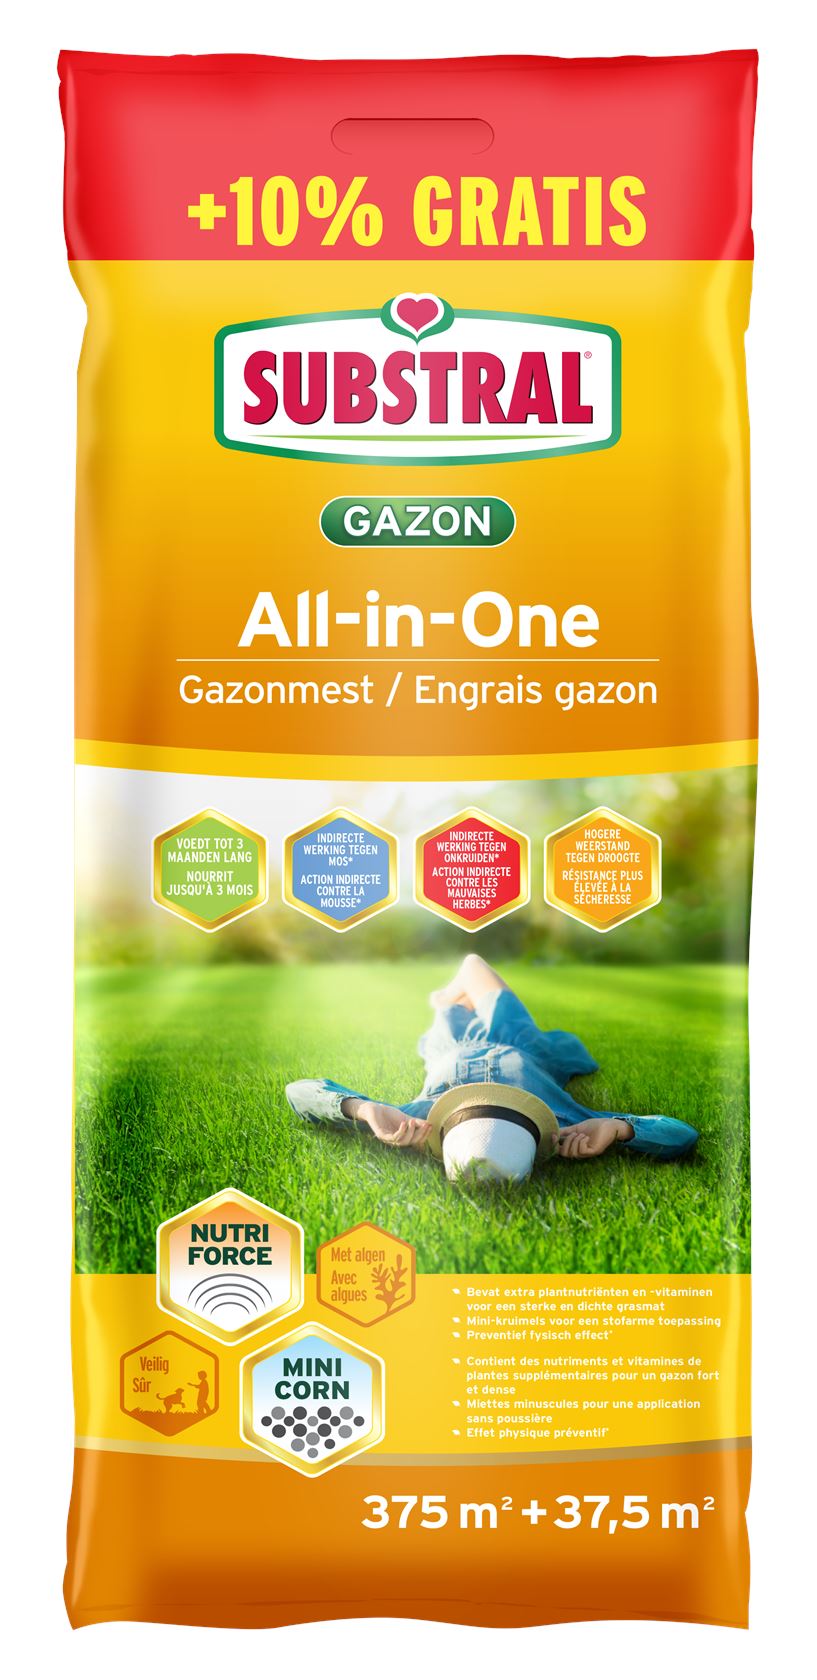 Substral-Gazonmest-All-in-One-20-5kg